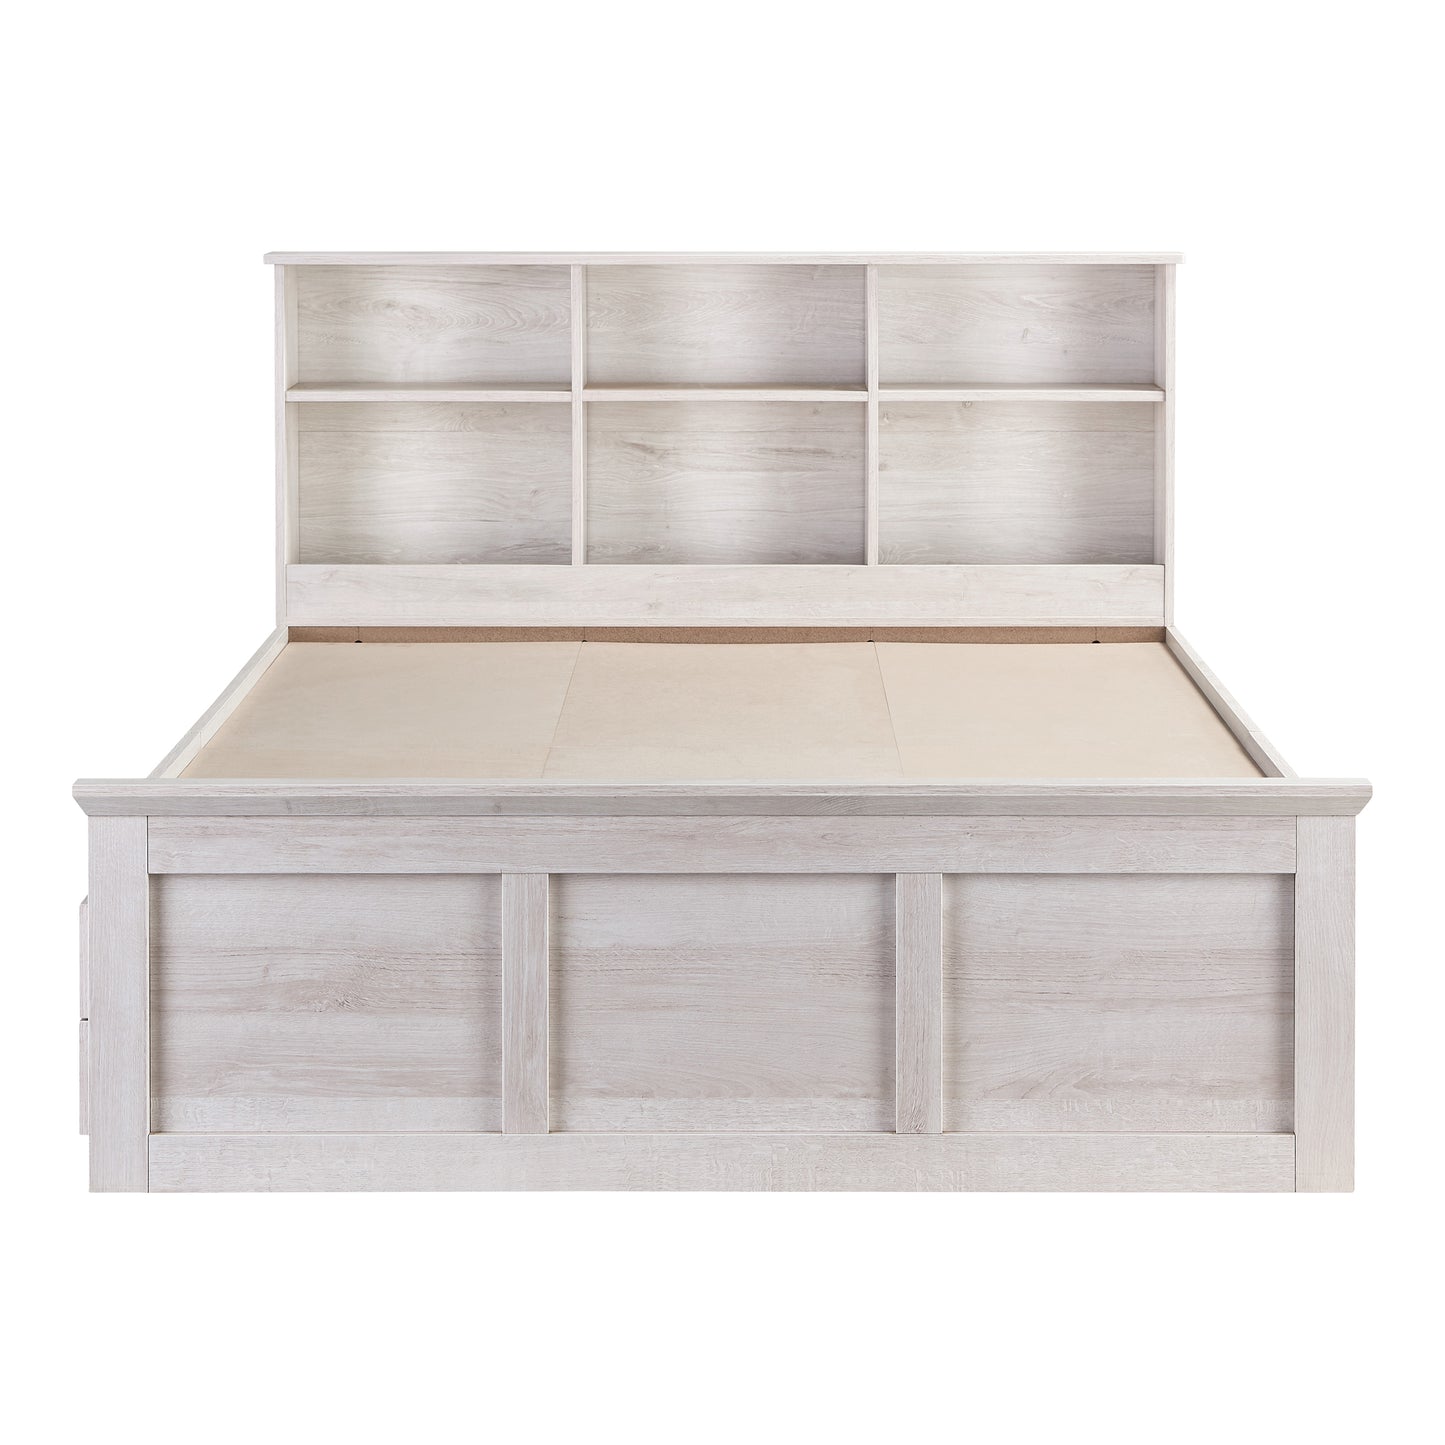 Front-facing transitional white two-drawer four-shelf storage bed shown with optional bookcase headboard on a white background